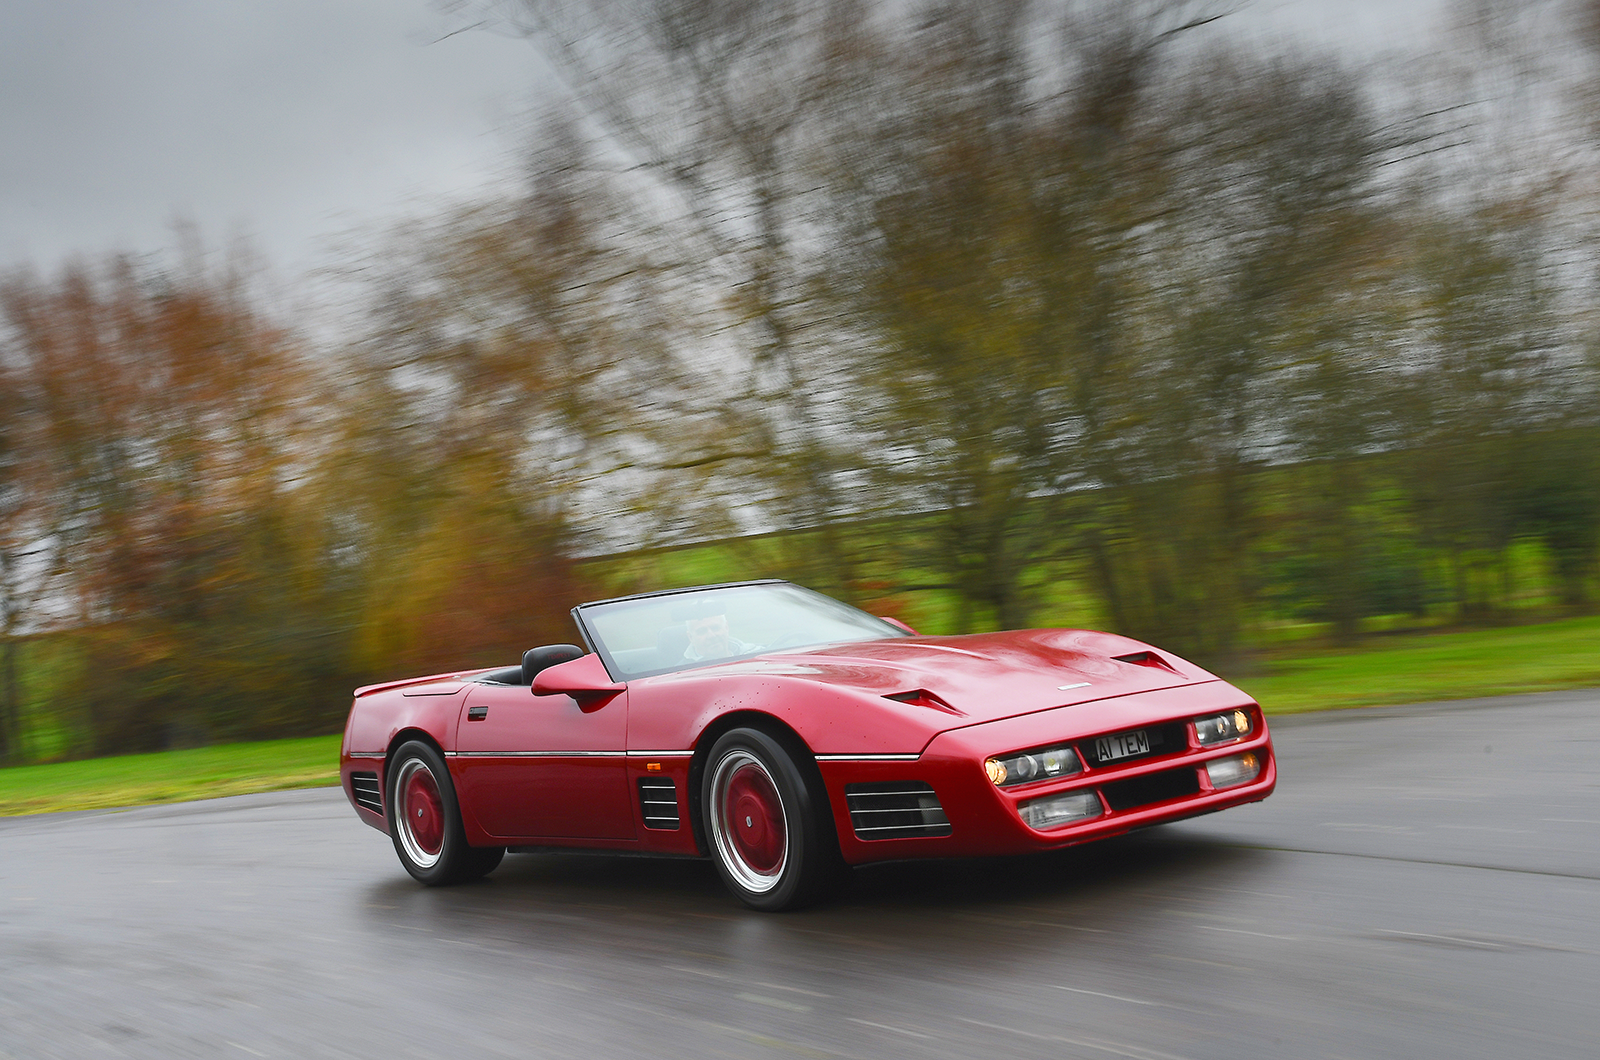 Classic & Sports Car – Jankel Tempest: the eye of the storm